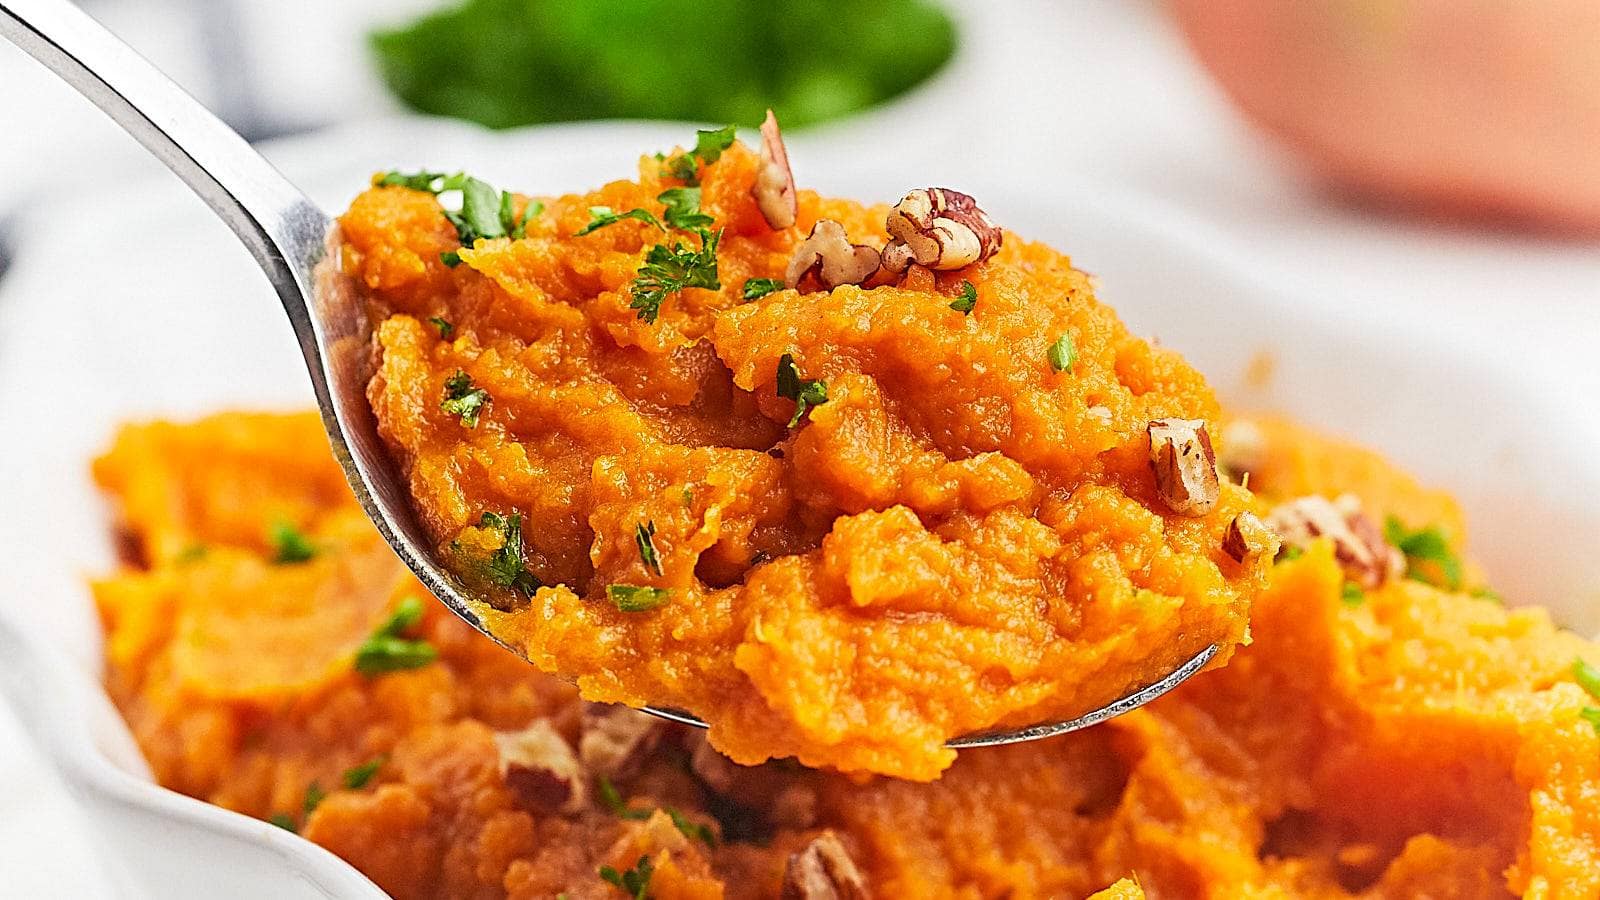 Mashed Sweet Potato recipe by Cheerful Cook.